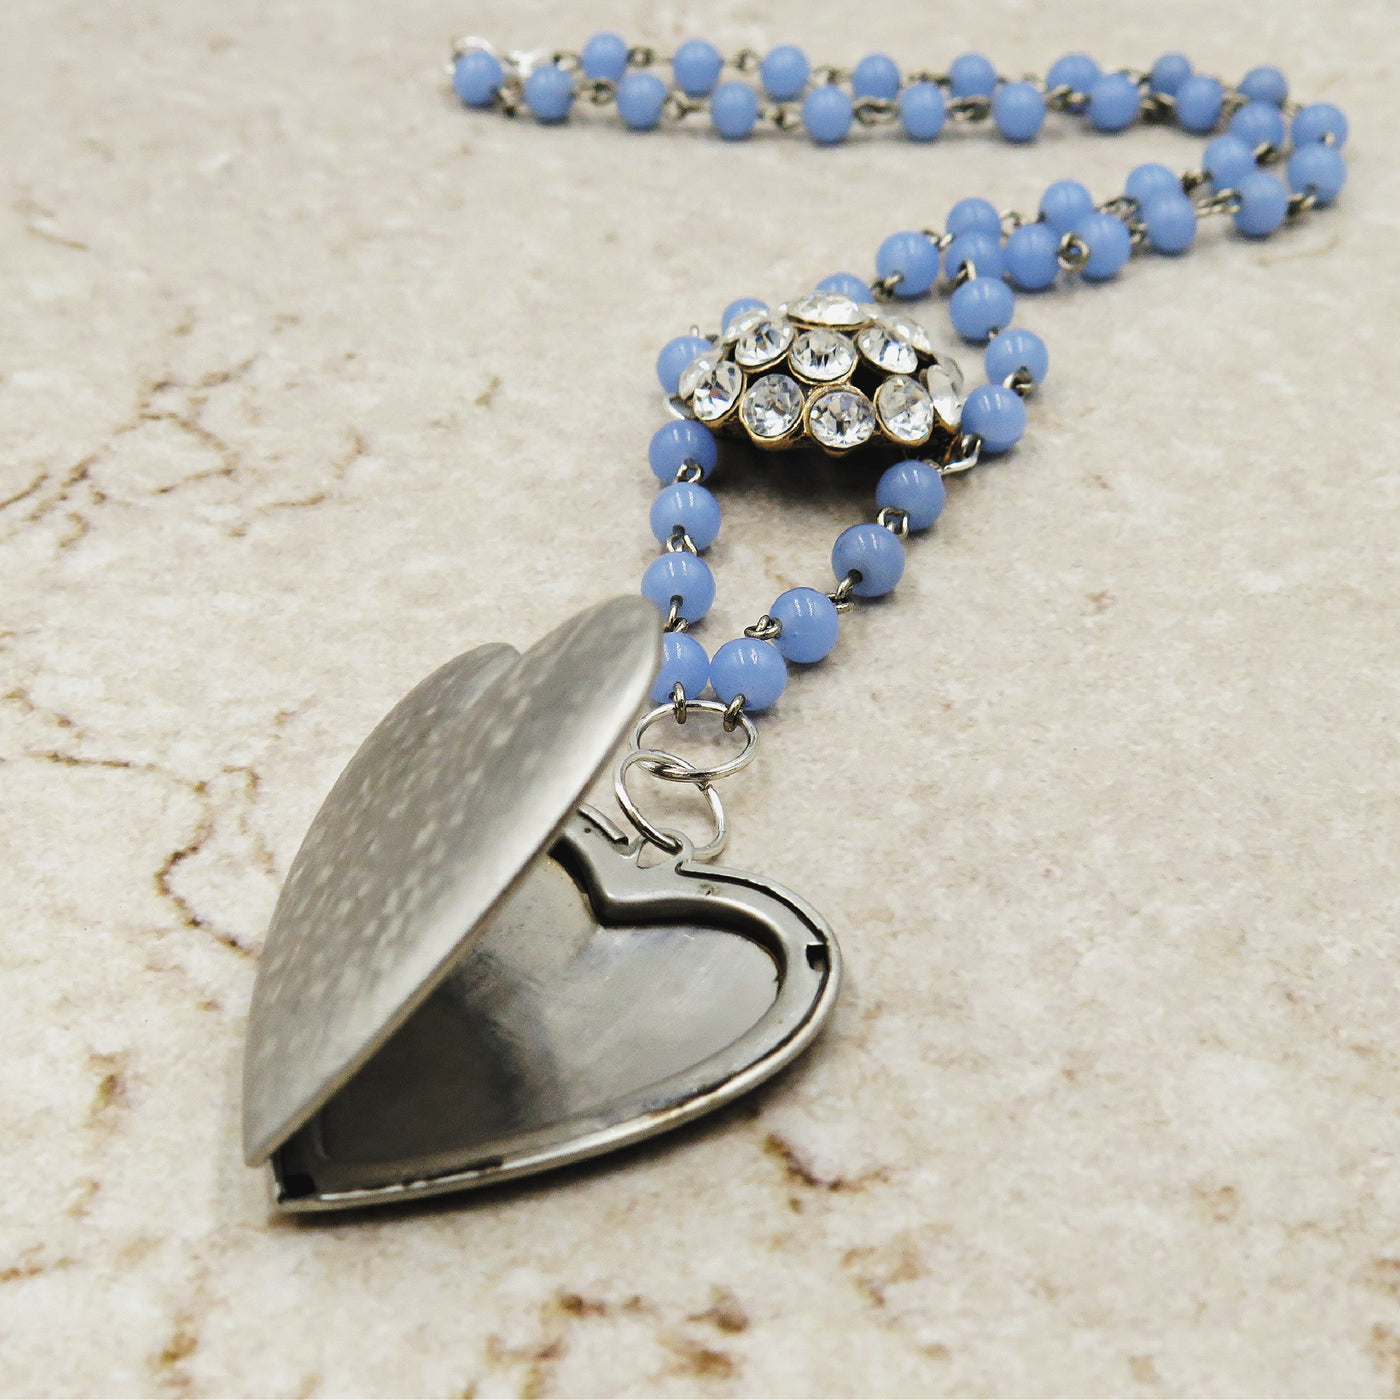 Patterned Silver Heart Locket with Vintage Rhinestone and Blue Beaded Chain